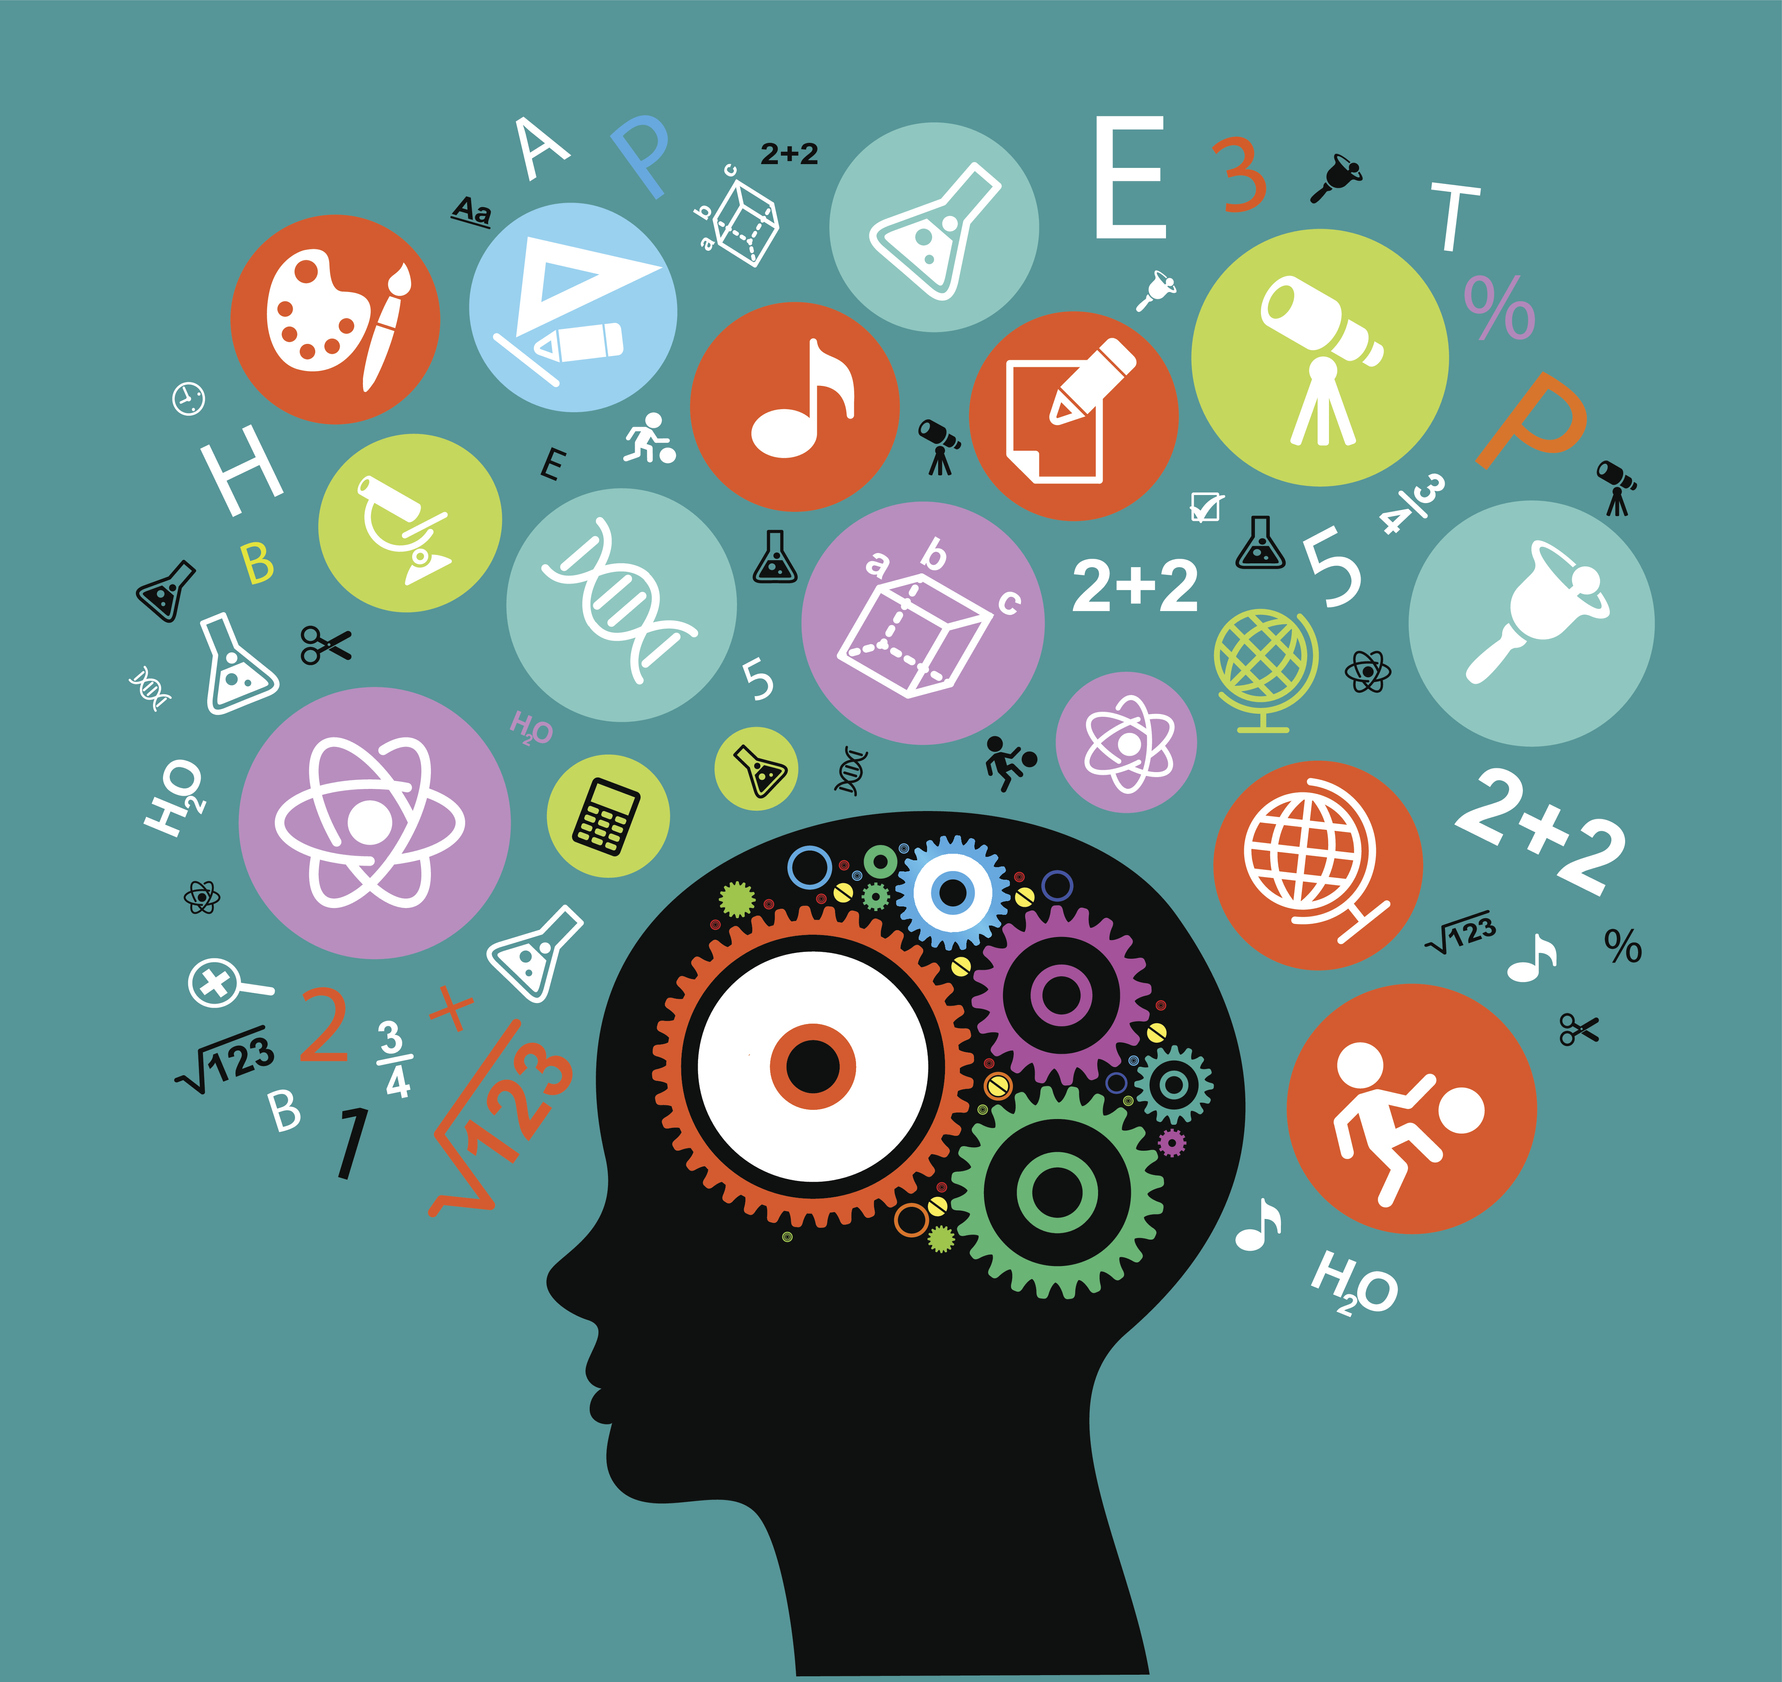 ADHD brain with icons representing "multiple intelligences": book smart, body smart, people smart, etc.